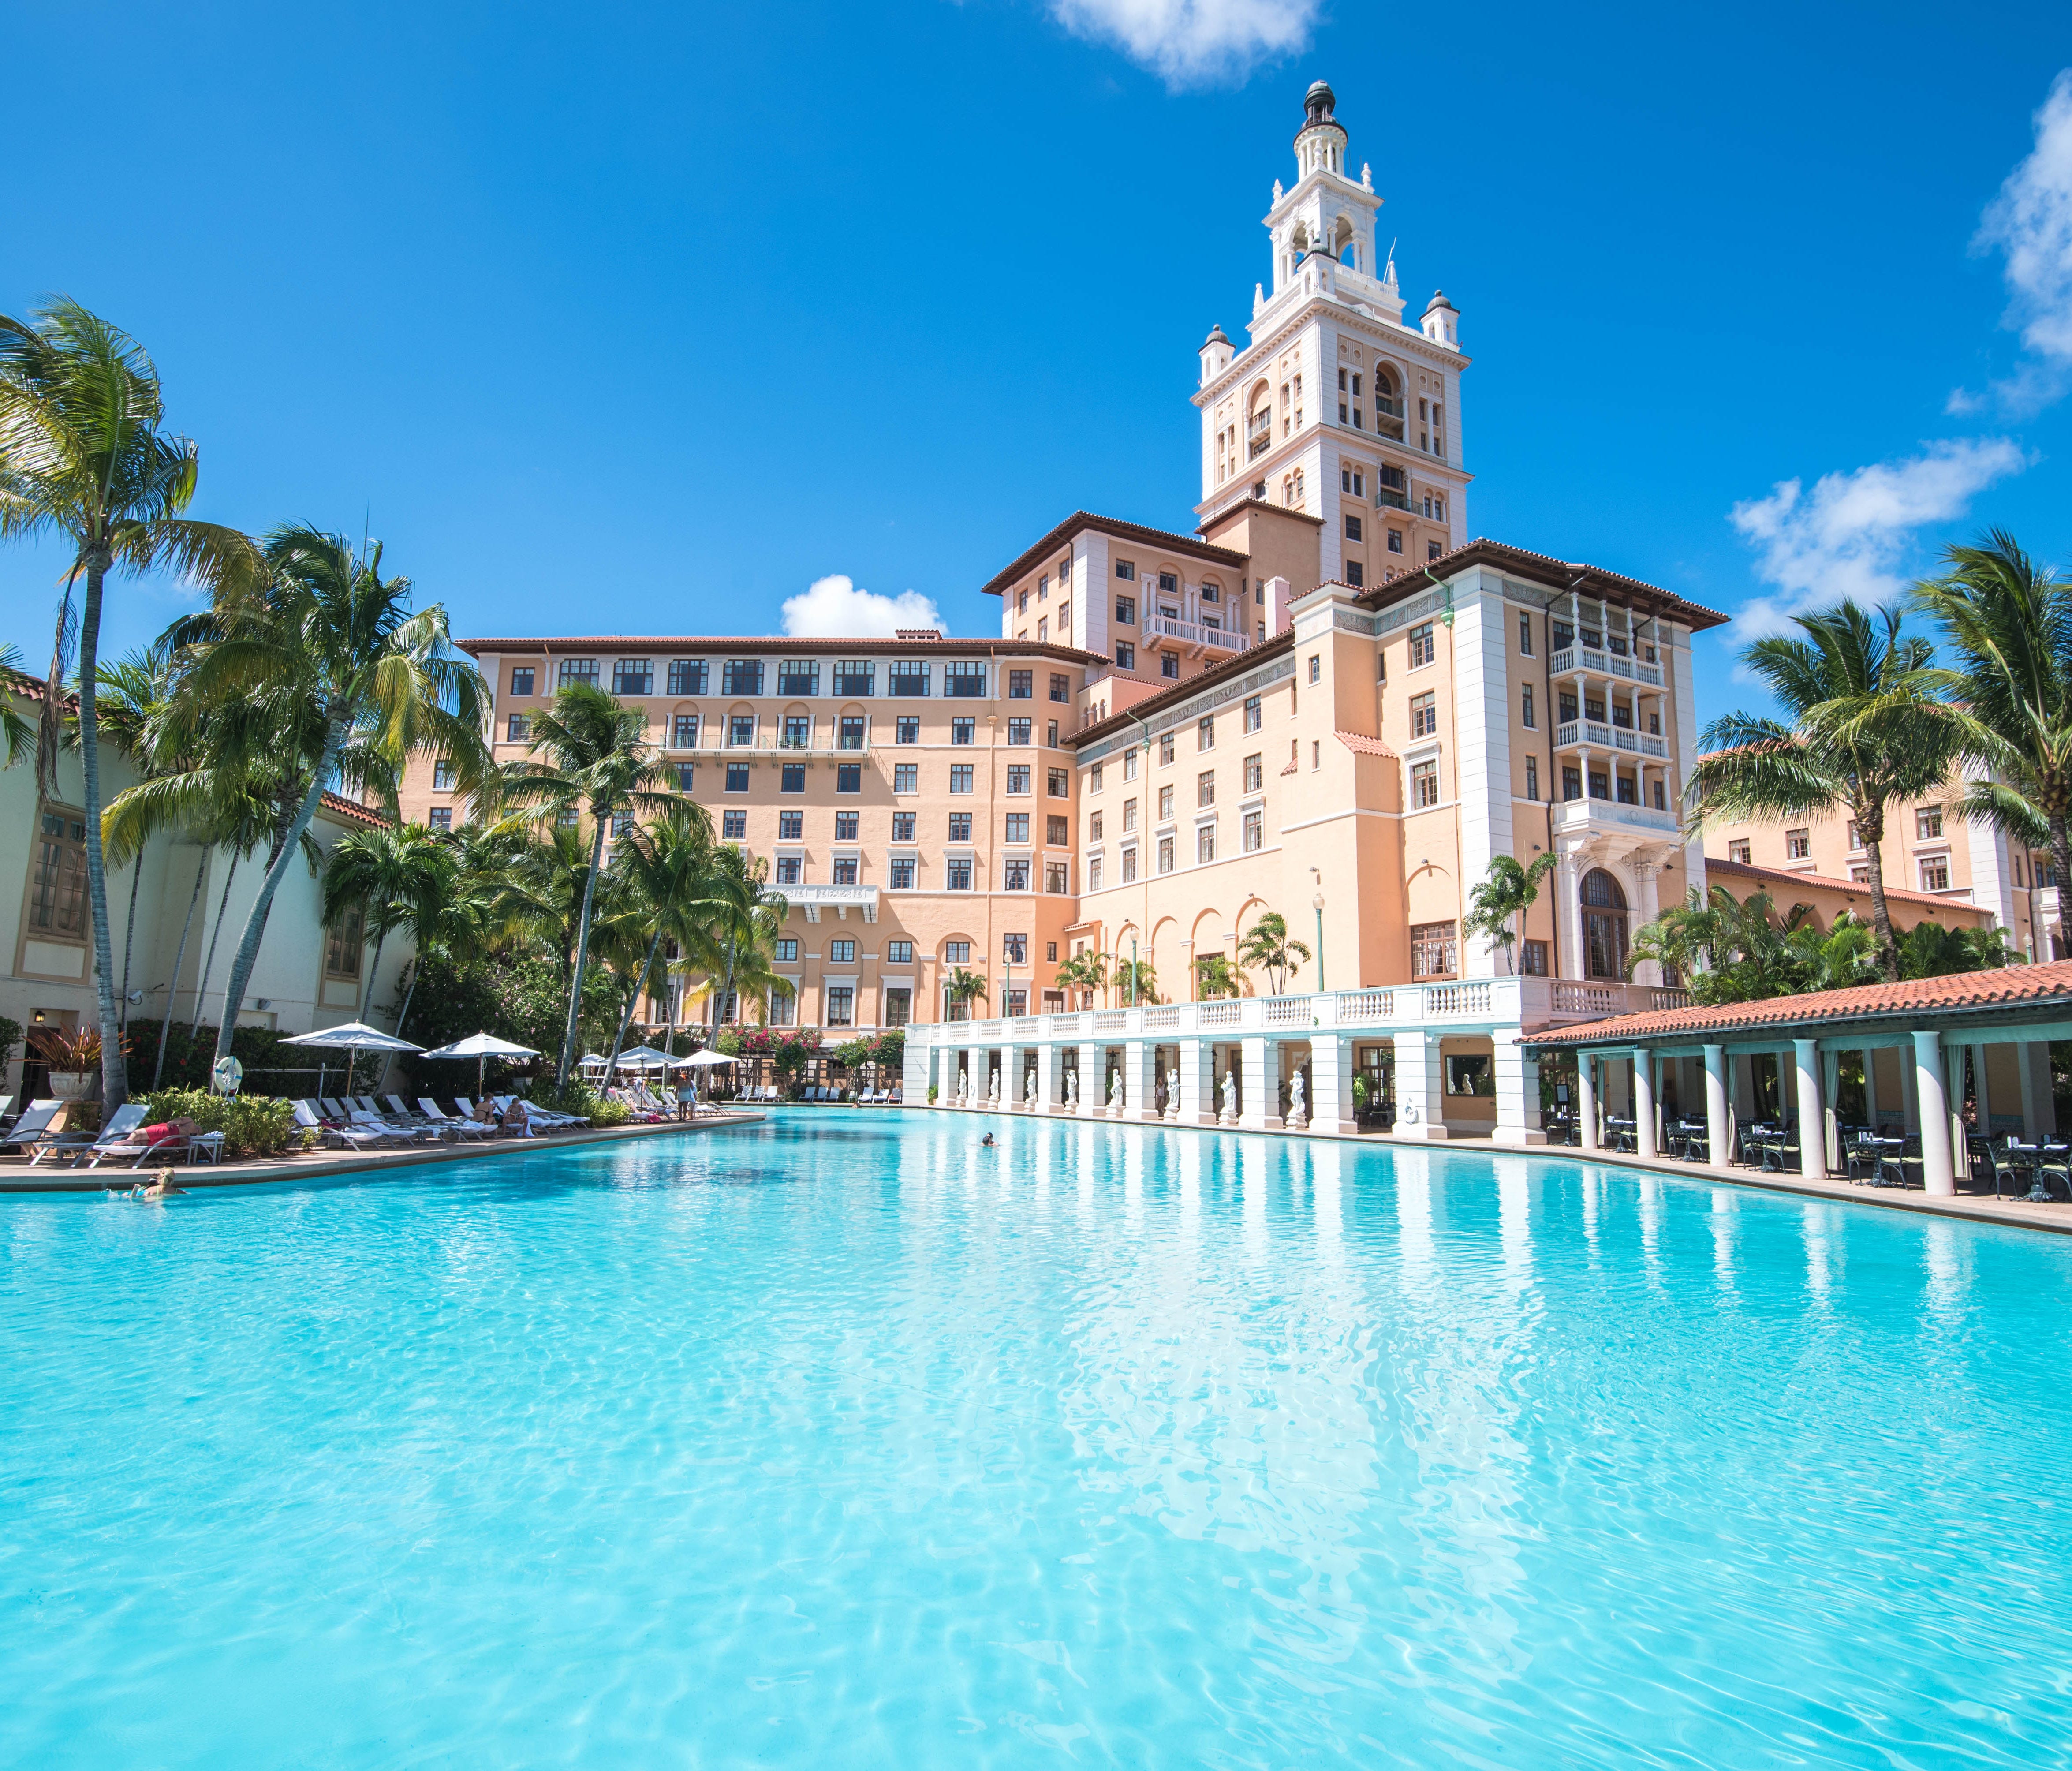 The Biltmore Hotel, Miami: Located in the Coral Gables neighborhood of Miami, the Biltmore was constructed in 1926, and at the time it was the tallest building in Florida, at 315 feet. During the Jazz Age, it hosted luminaries like Bing Crosby, Judy 